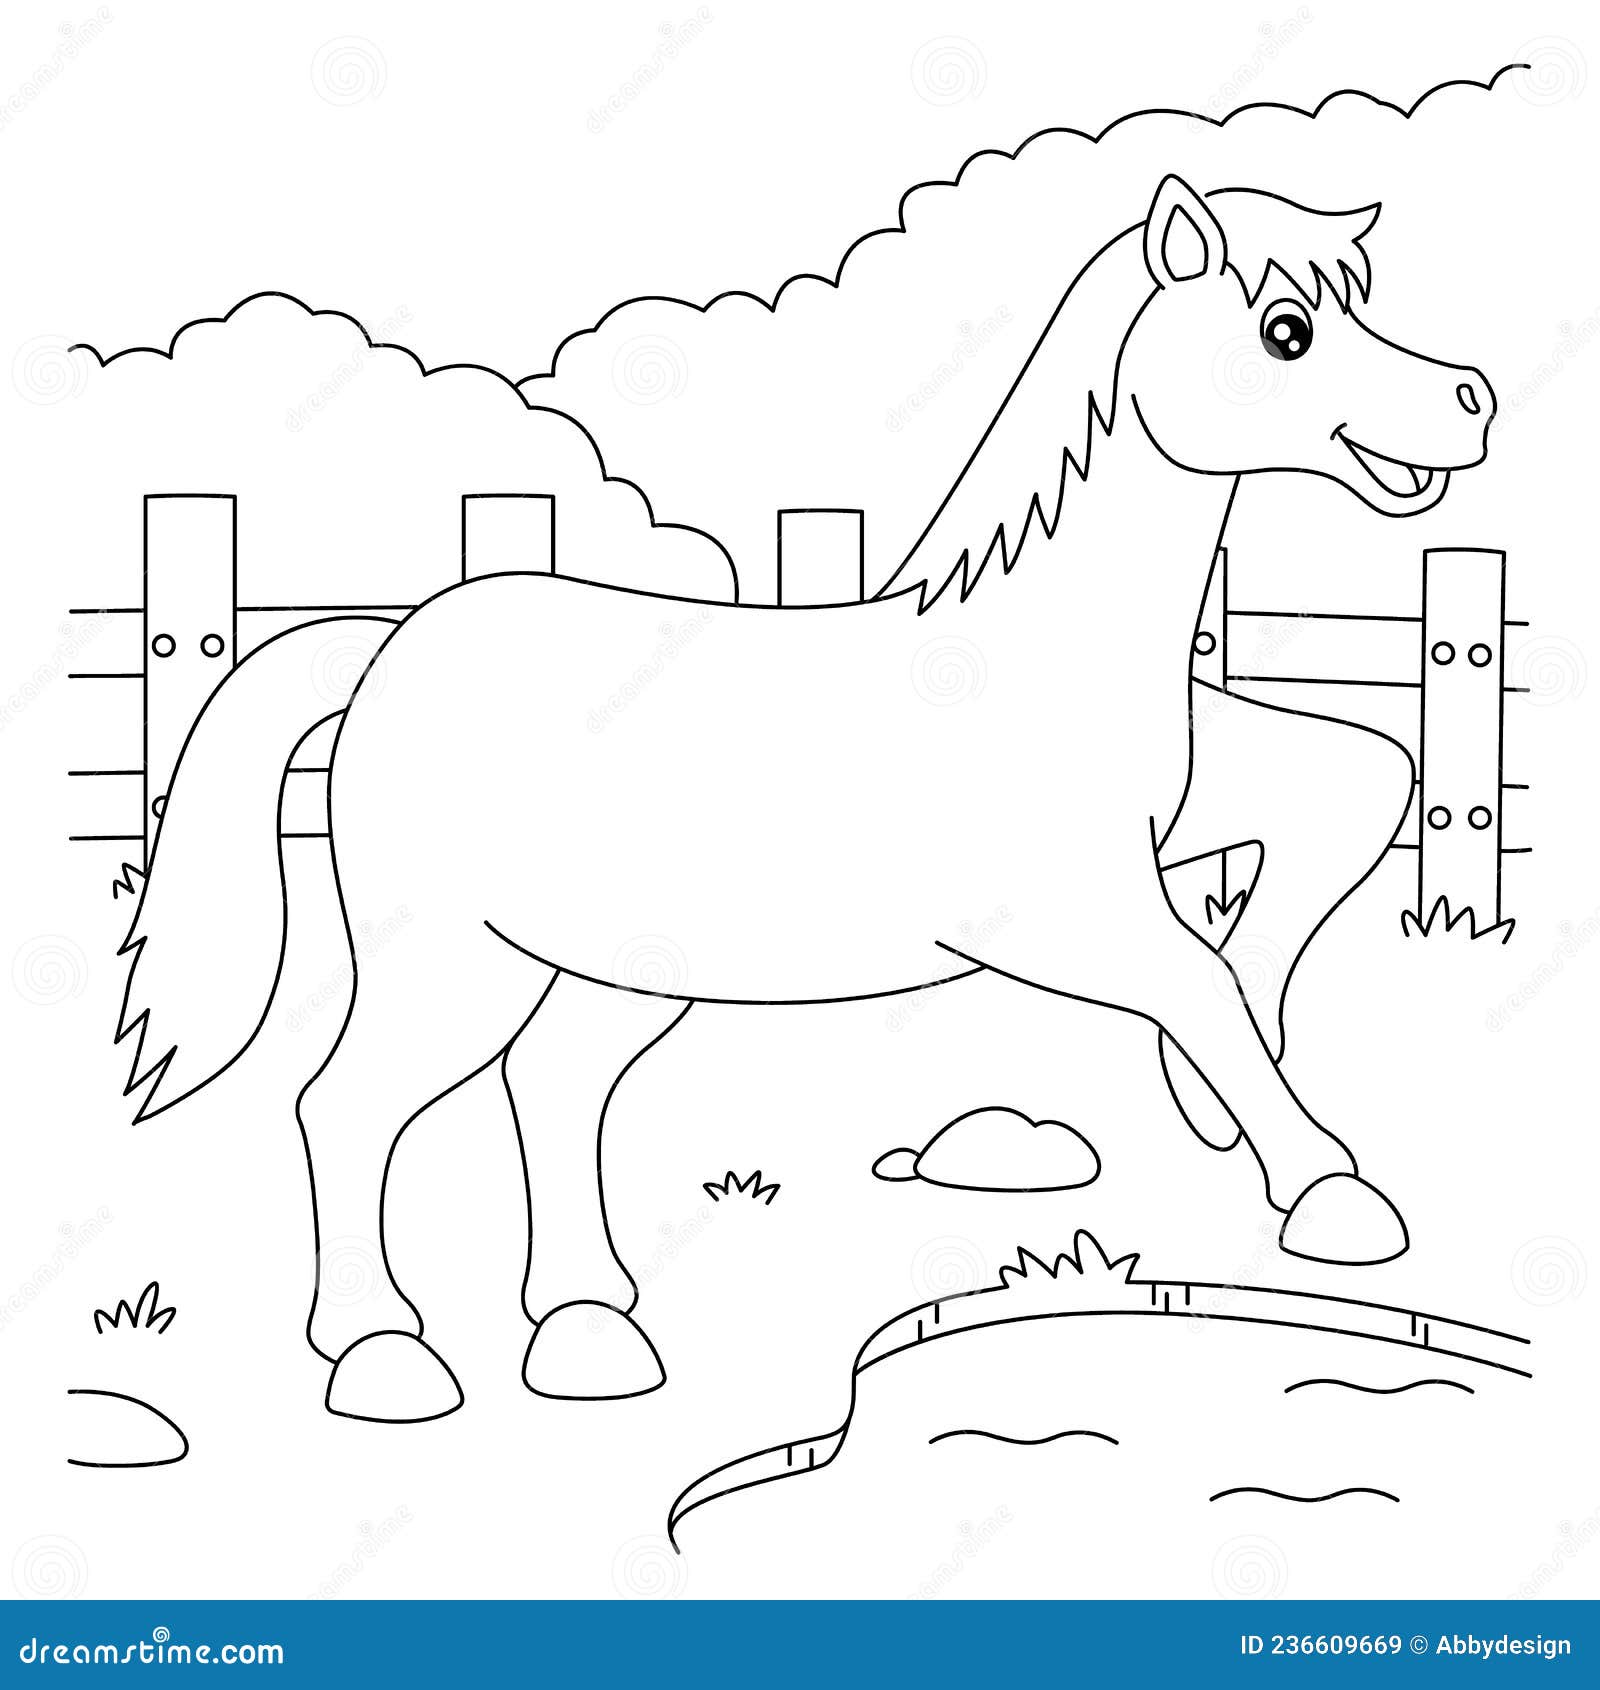 Horse coloring page for kids stock vector